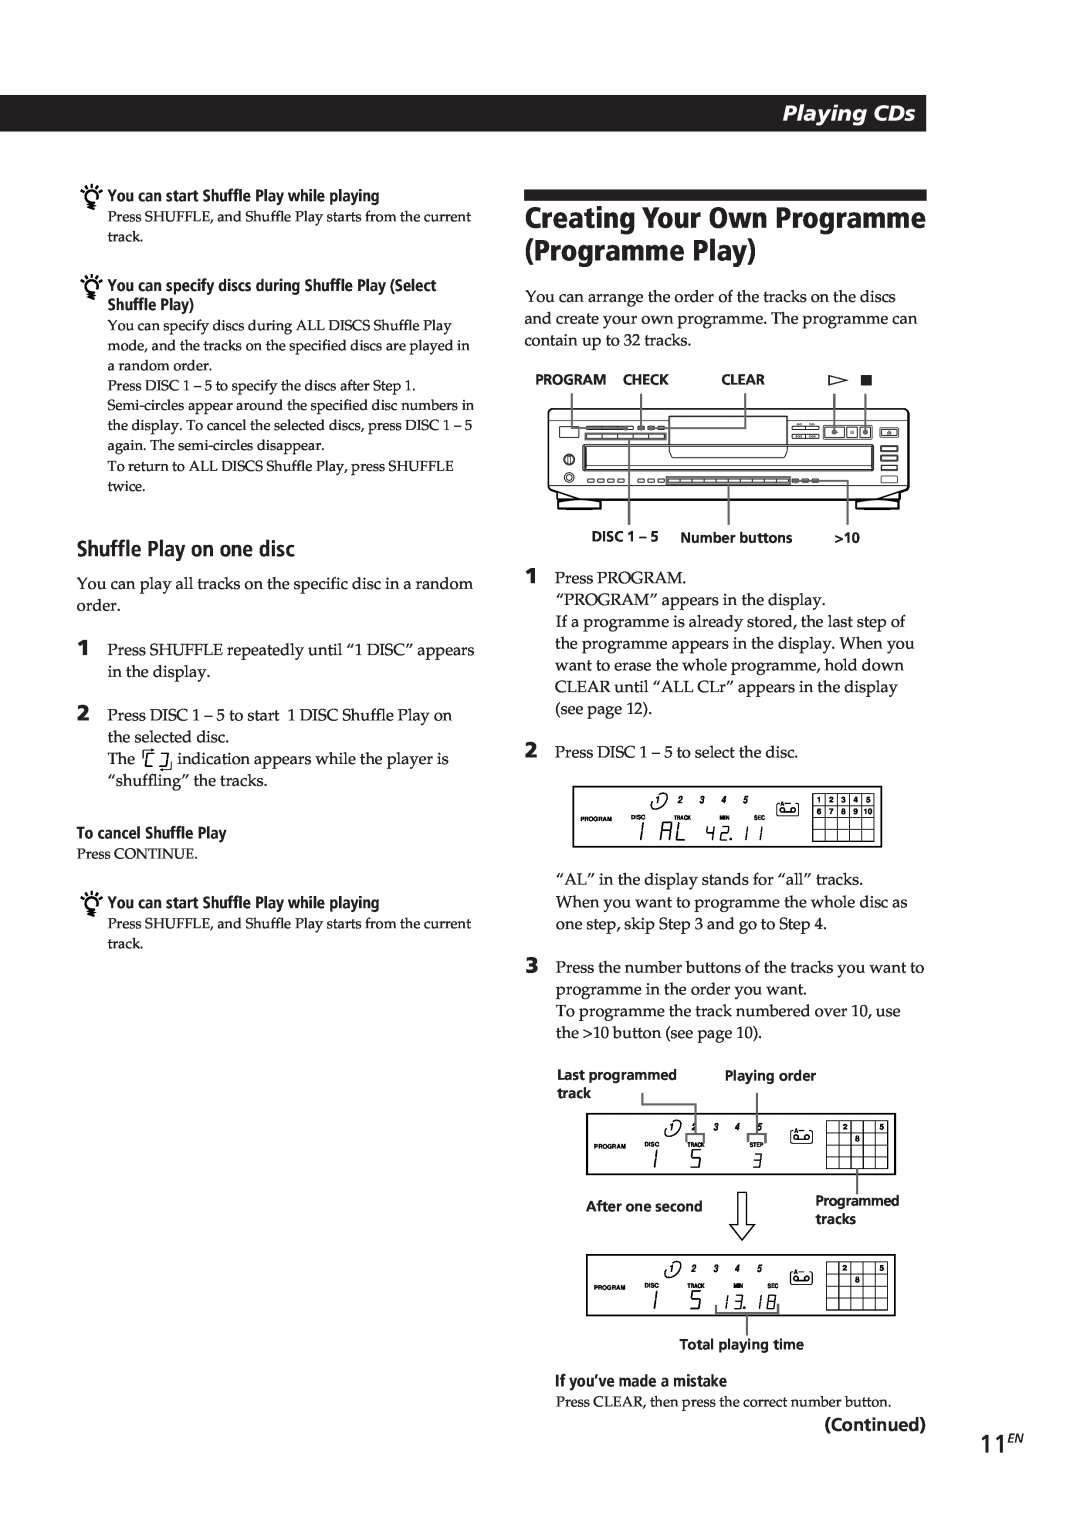 Sony CDP-C661, CDP-CE505, CDP-CE305 Creating Your Own Programme Programme Play, 11EN, Shuffle Play on one disc, Playing CDs 